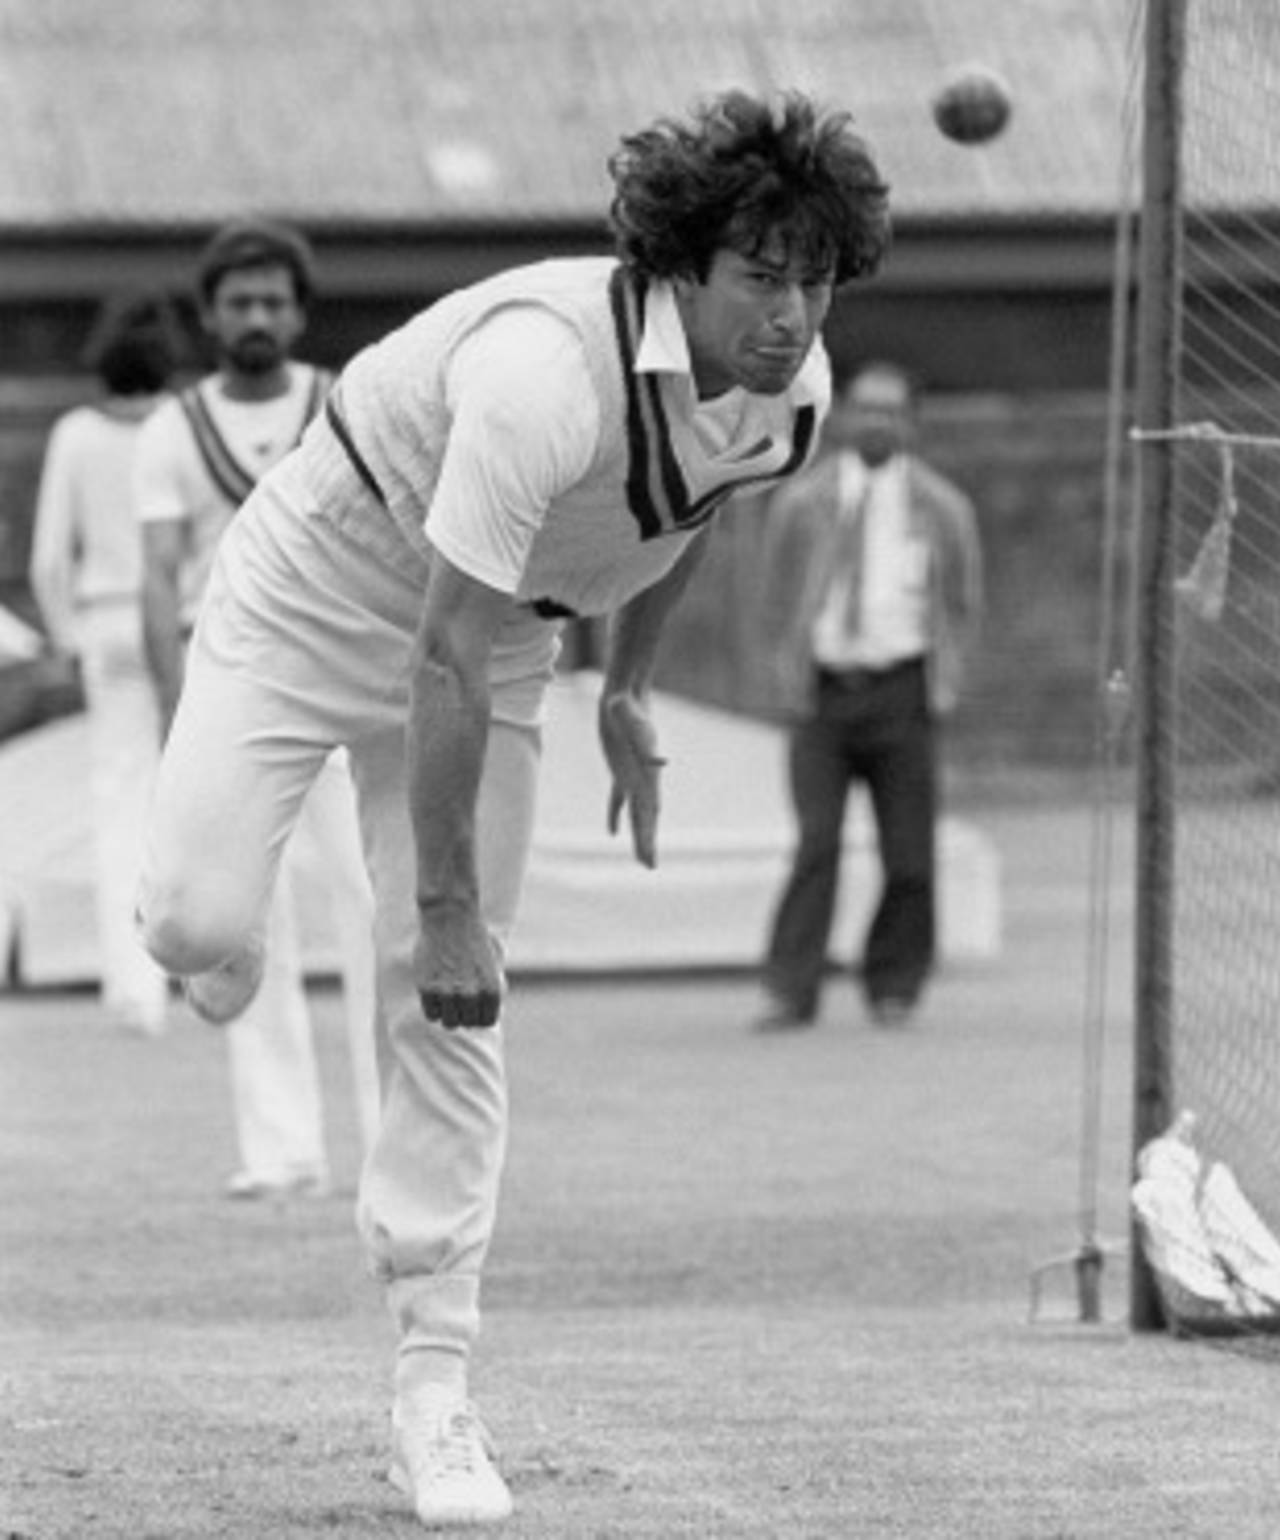 Imran Khan bowls in the nets ahead of the Lord's Test, August 11, 1982